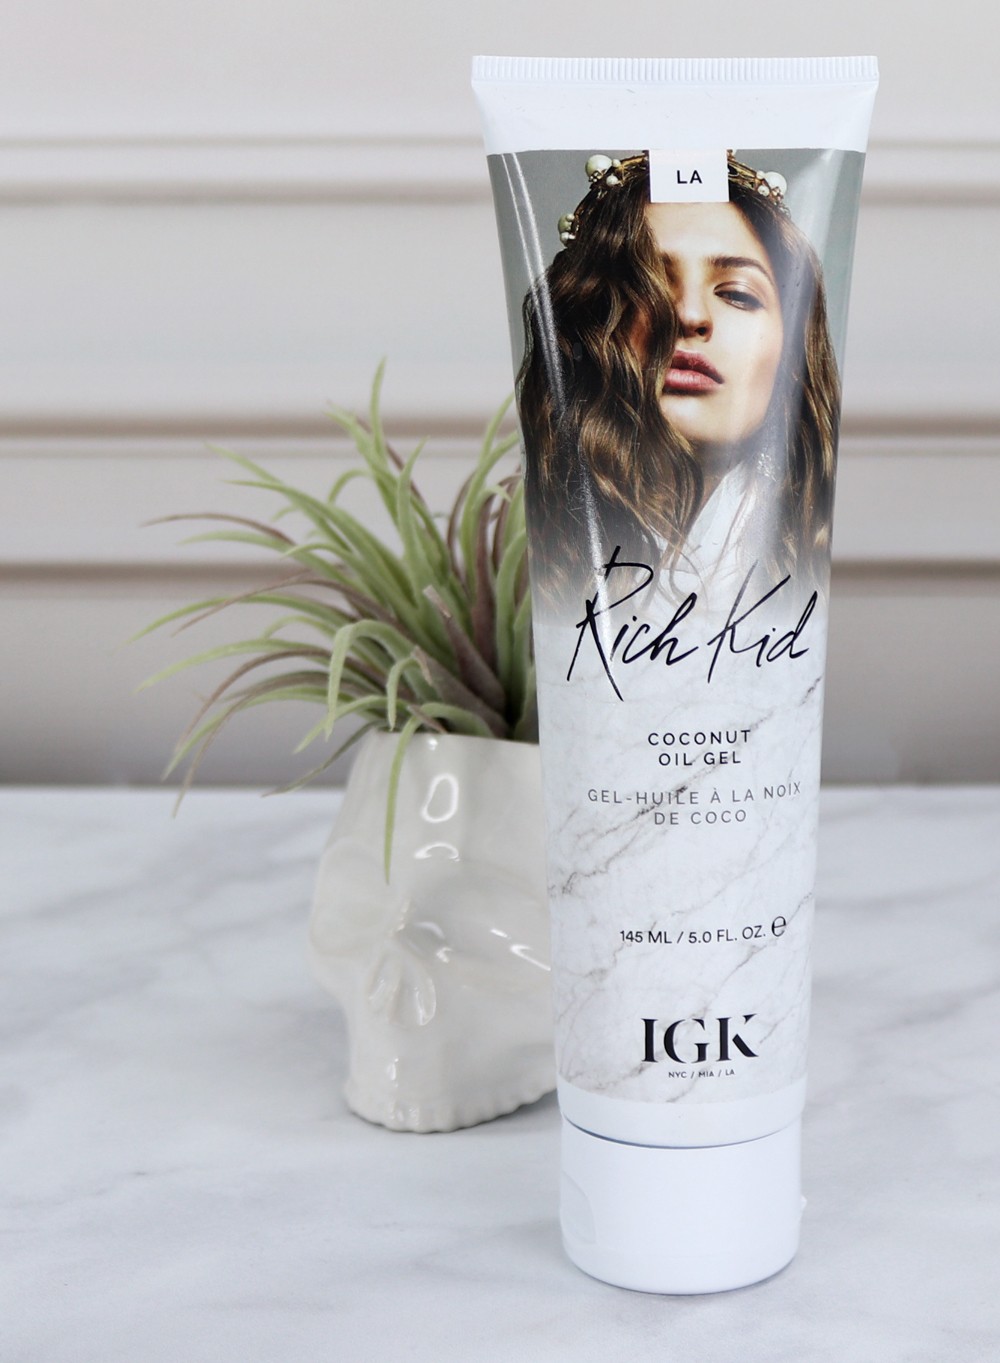 IGK Rich Kid Coconut Oil Gel Review - IGK Cruelty Free Hair Product Hits and Misses by popular Los Angeles cruelty free beauty blogger My Beauty Bunny